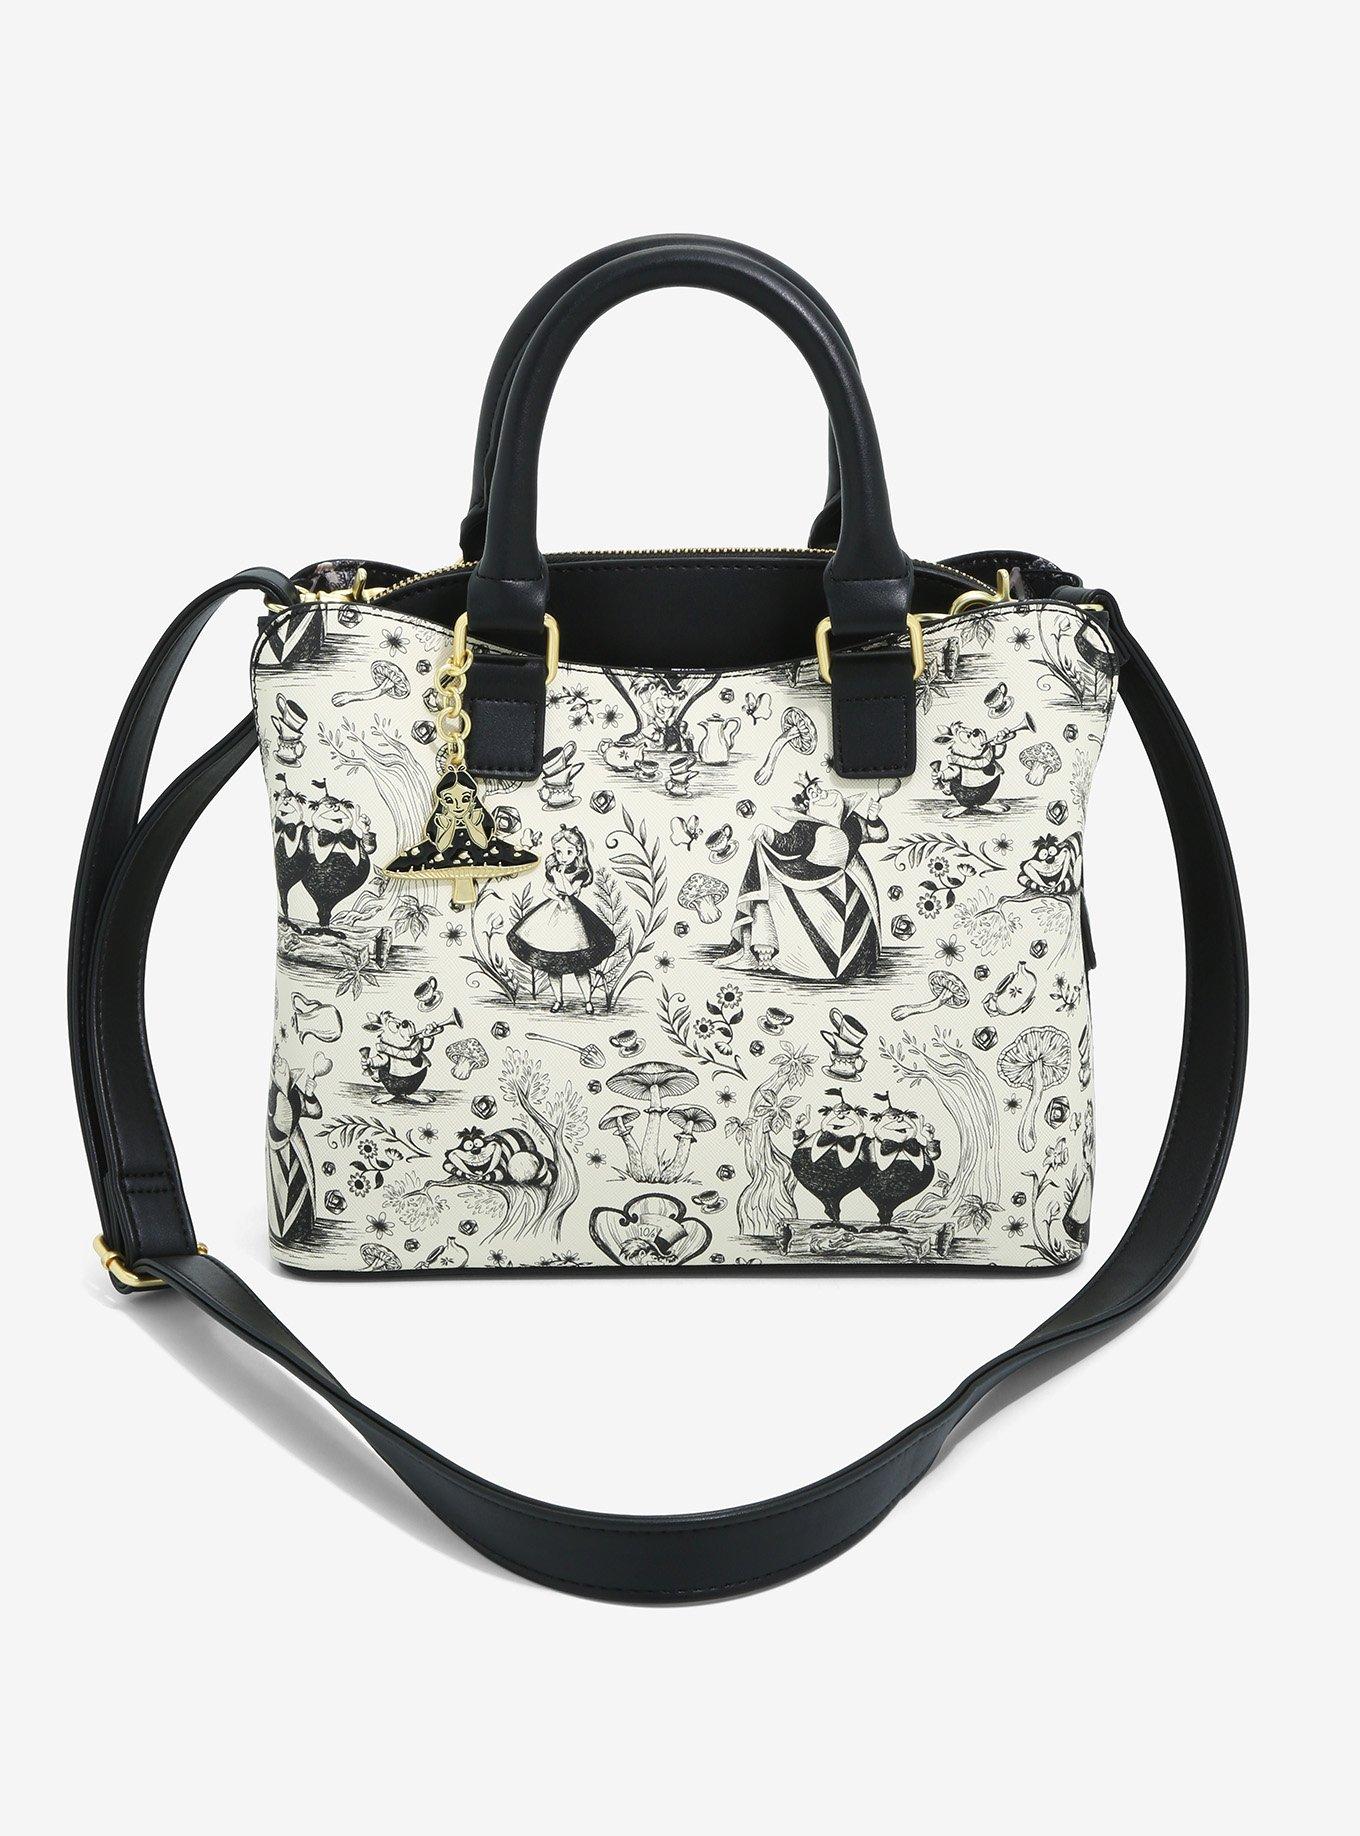 The Alice In Wonderland Loungefly Collection Is Mad With Style - bags 